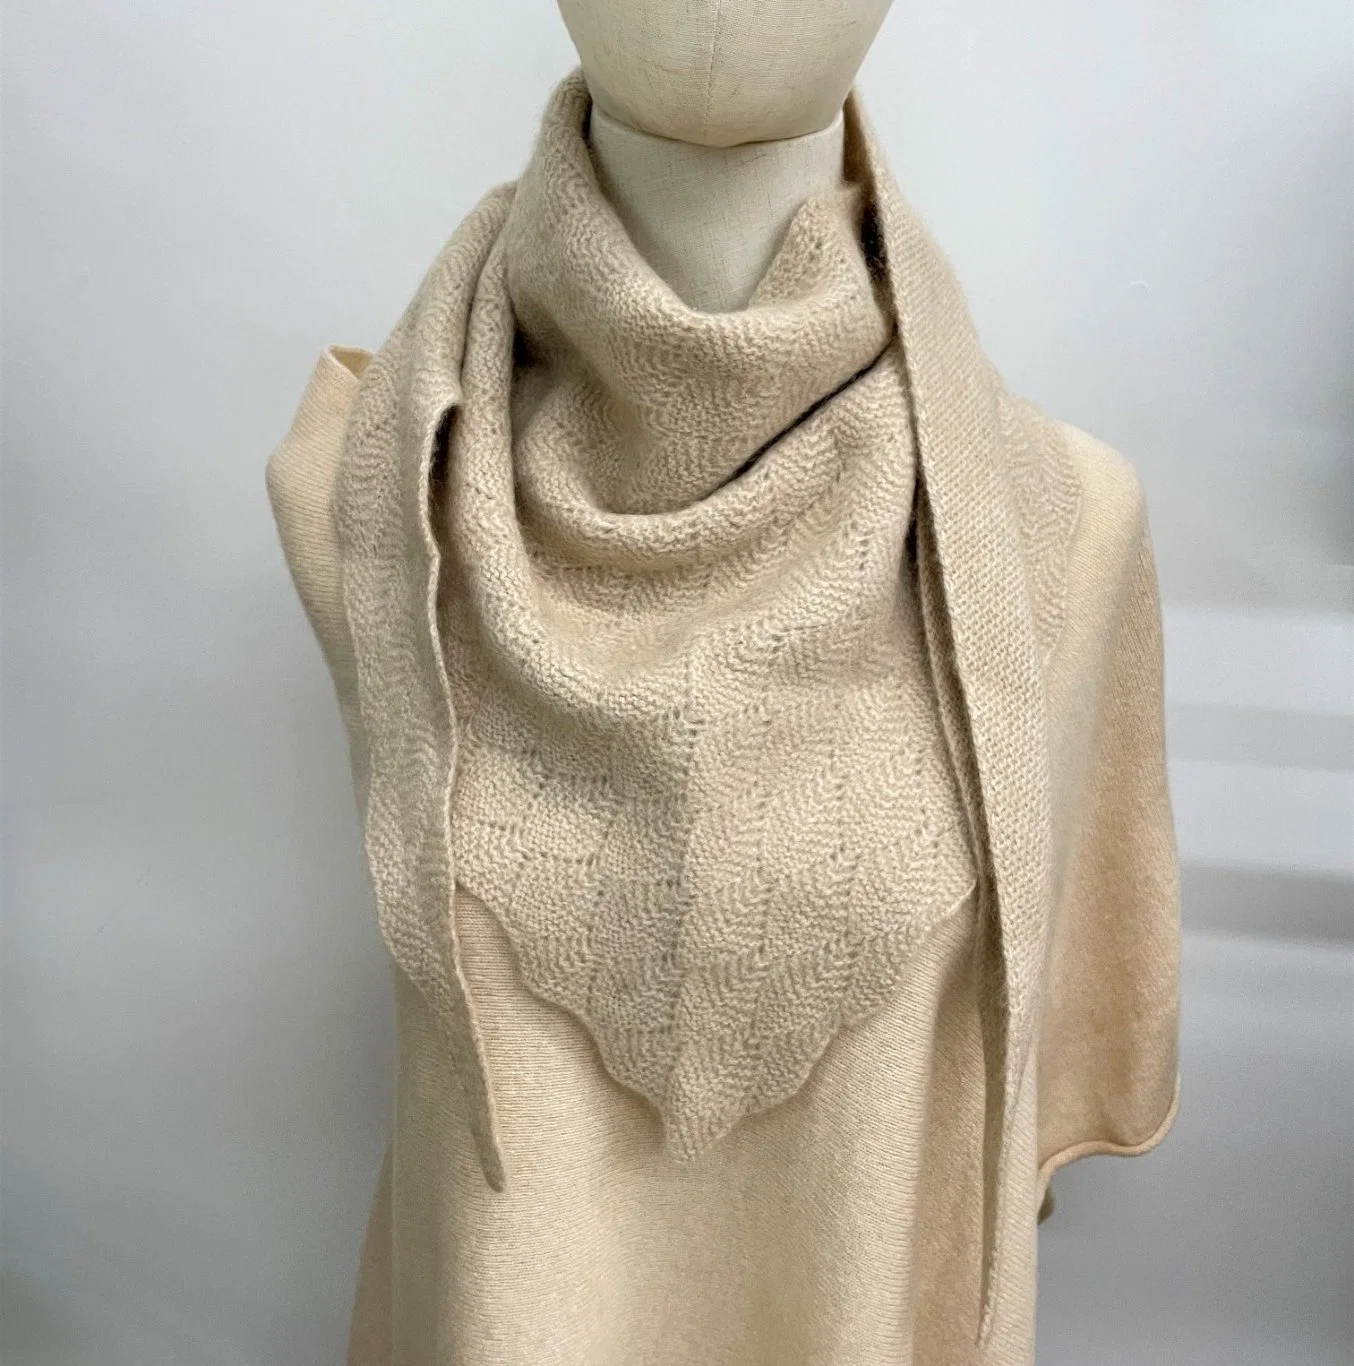 Women's Fashion 100% Cashmere Texture Knitted Neck Warmer Triangle Scarve